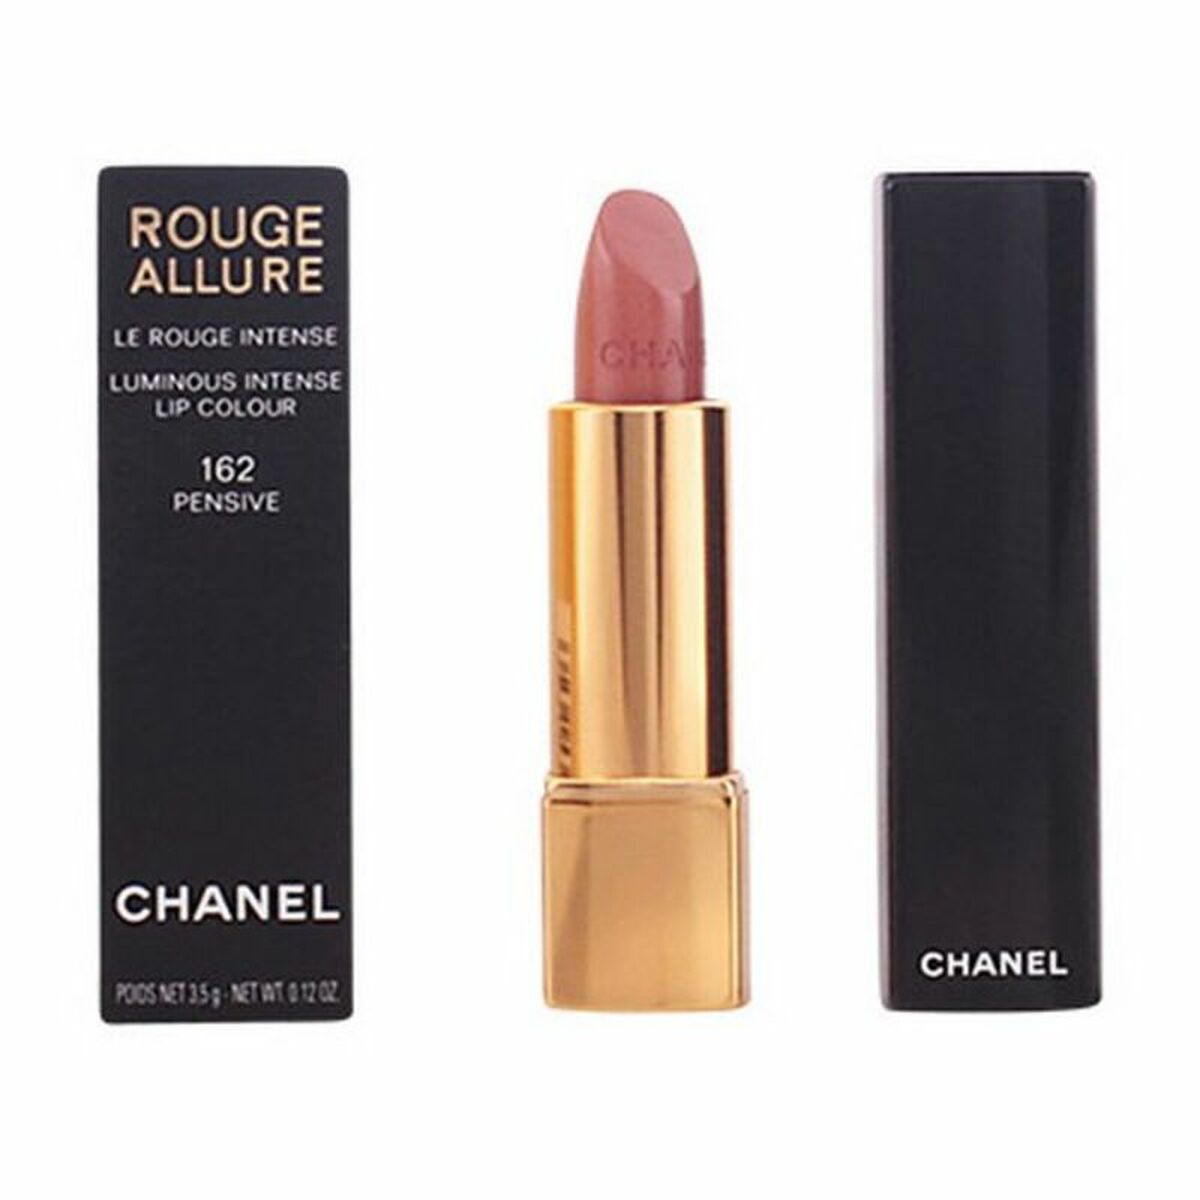 CHANEL CHANEL ROUGE ALLURE L'EXTRAIT HIGH-INTENSITY LIP COLOUR CONCENTRATED  RADIANCE AND CARE REFILLABLE